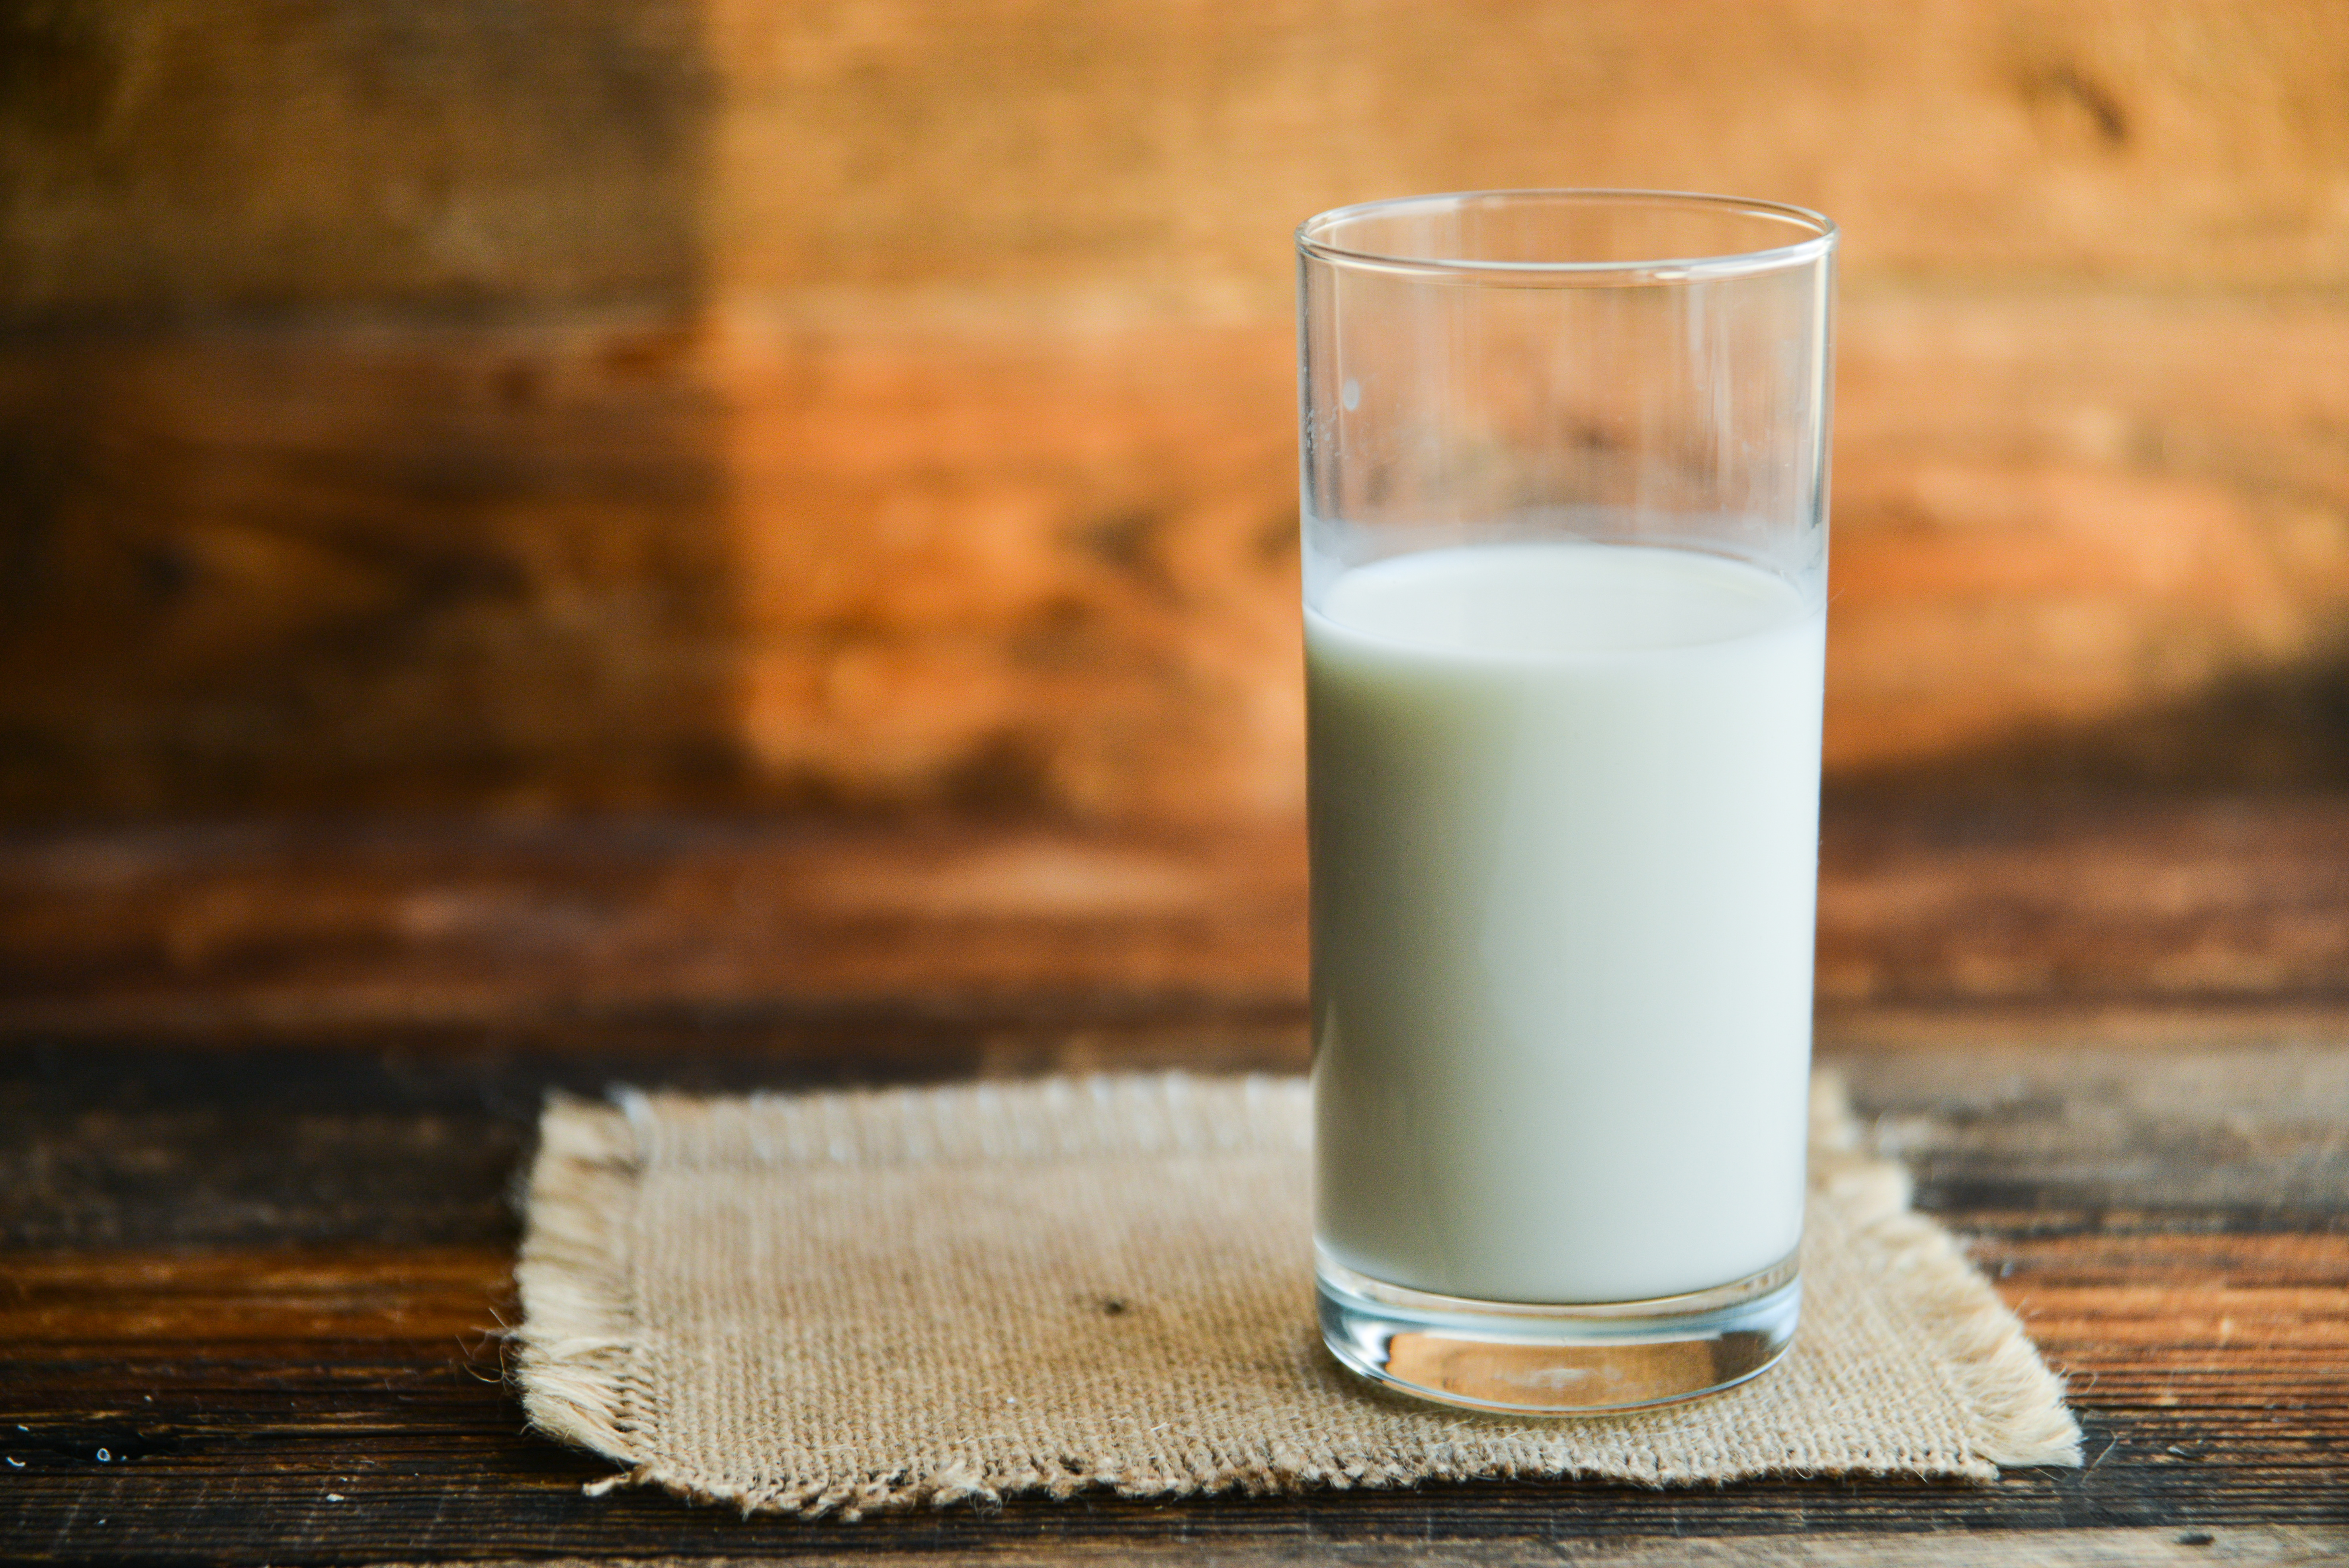 A glass of milk ready to drink placed on a jute napkin on a wooden table.